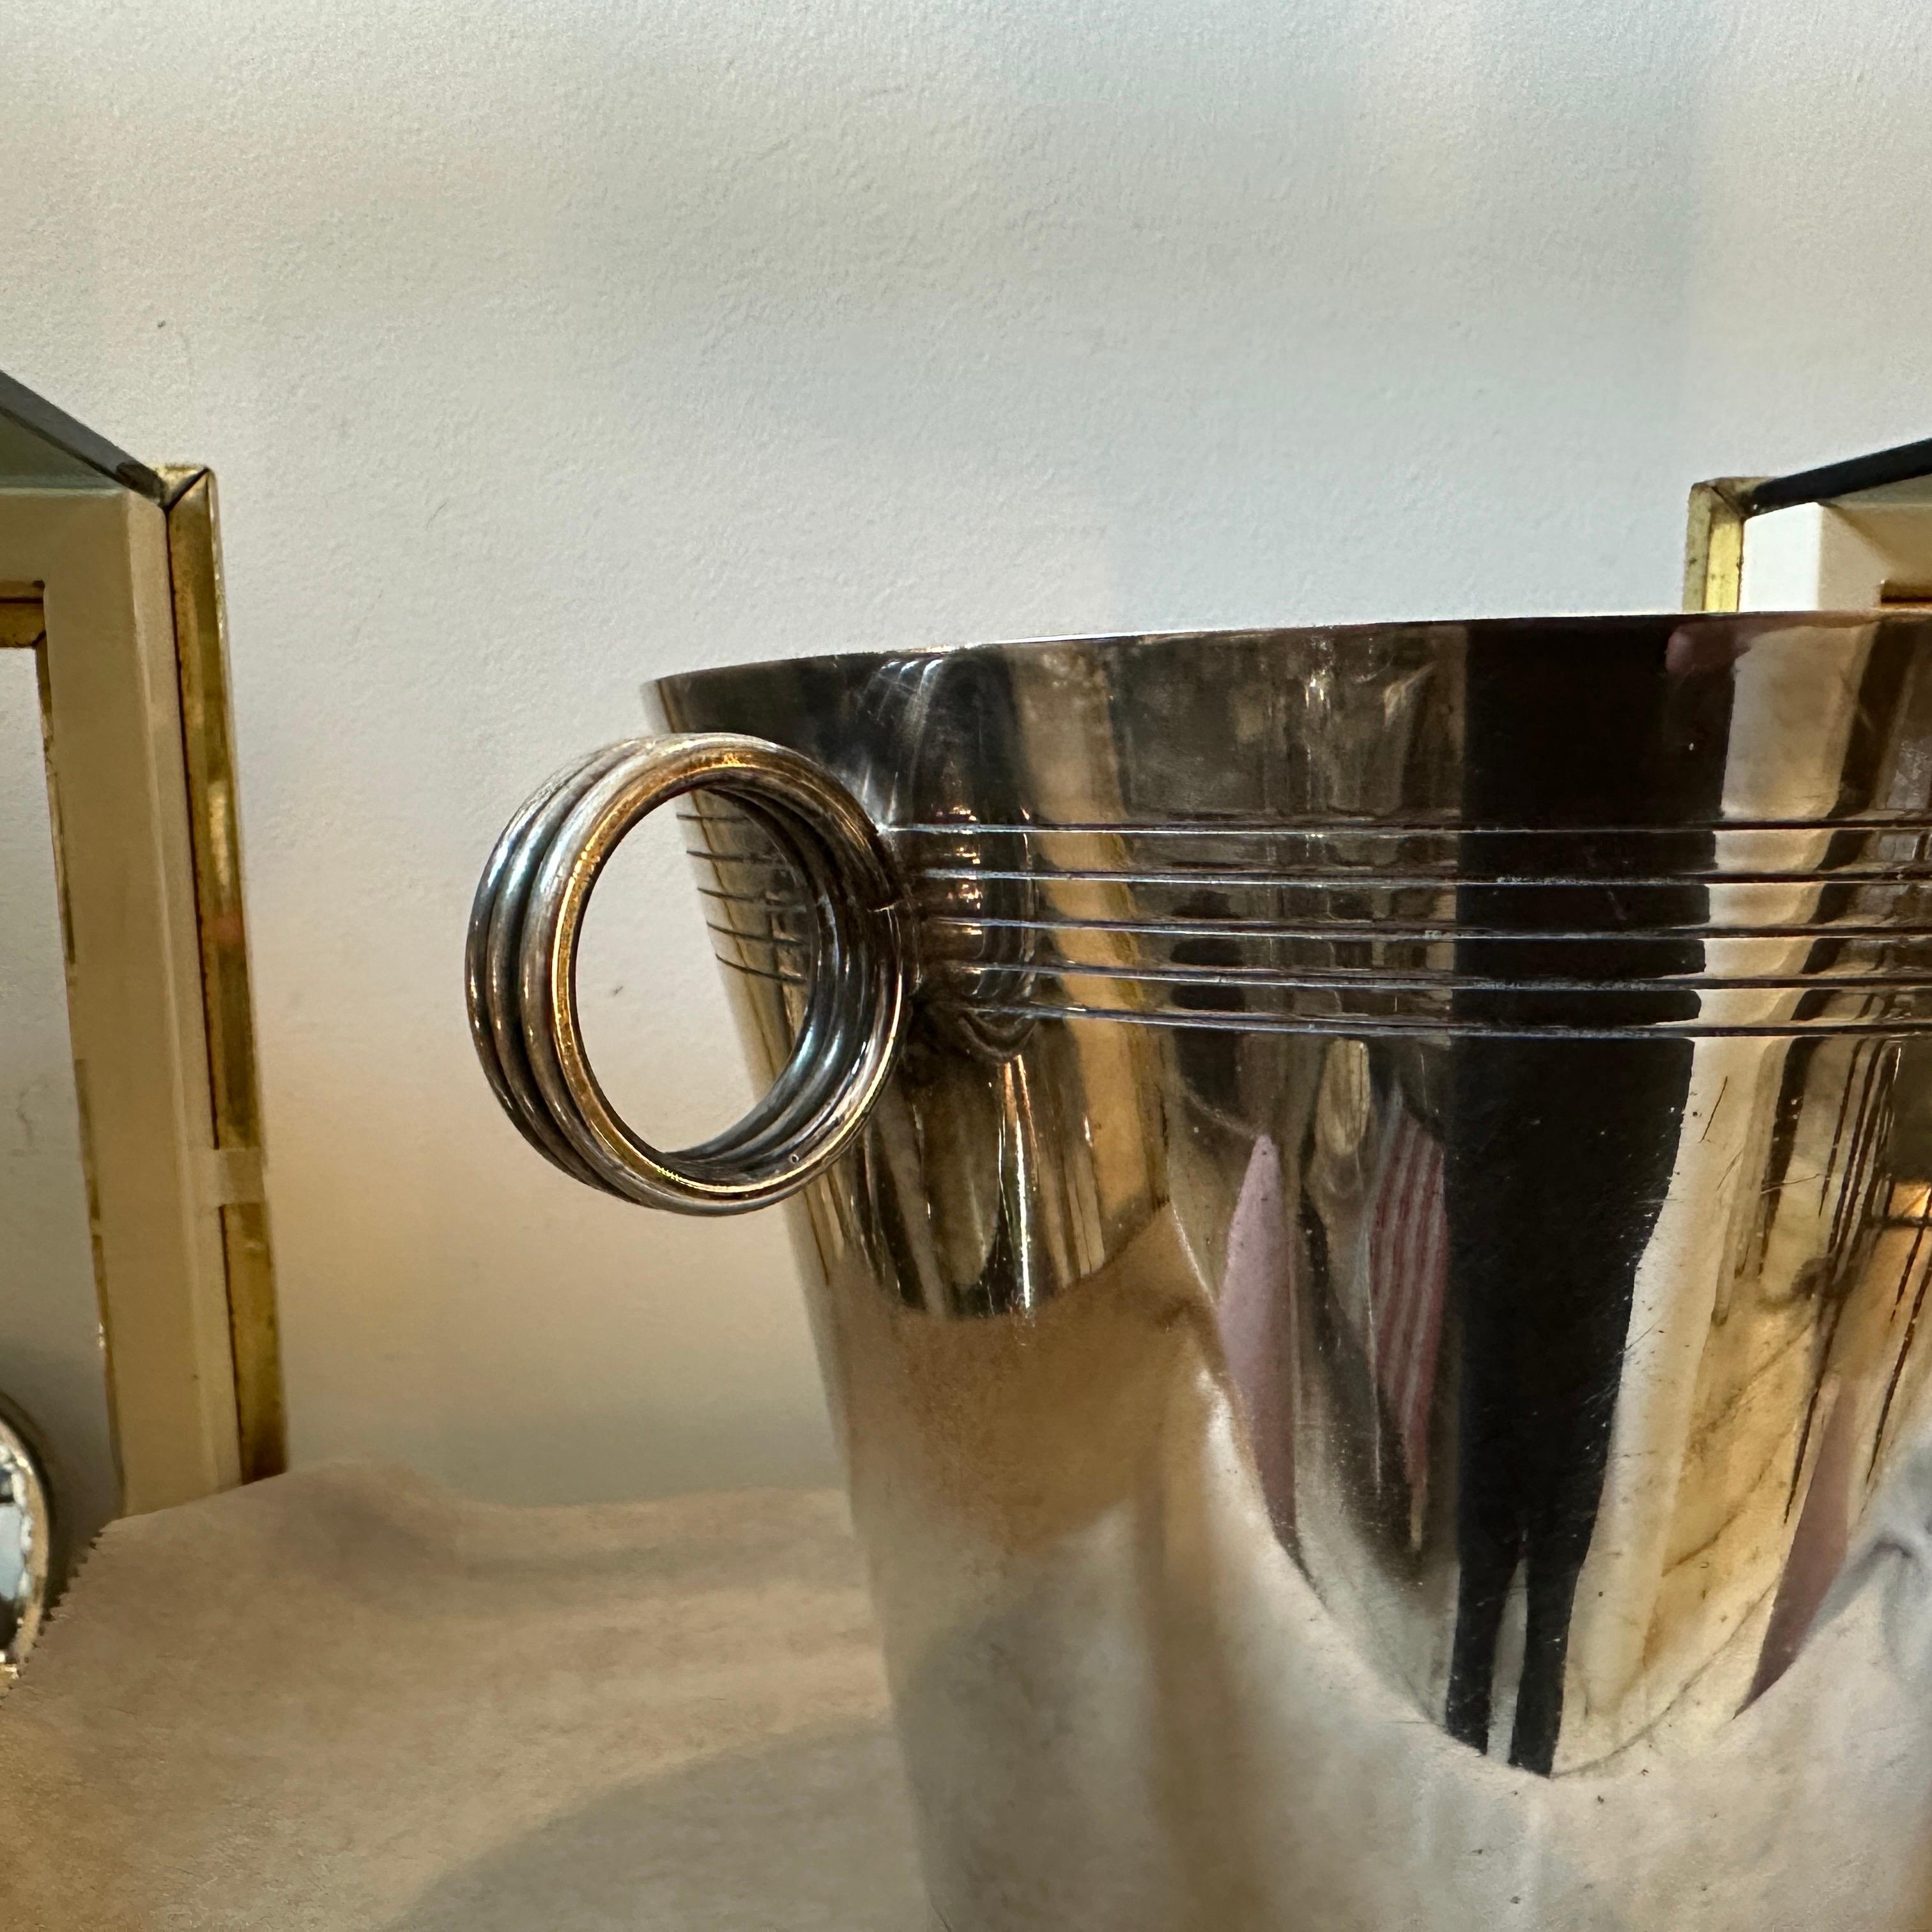 1950s Art Deco Silver Plated French Wine Cooler In Good Condition For Sale In Aci Castello, IT